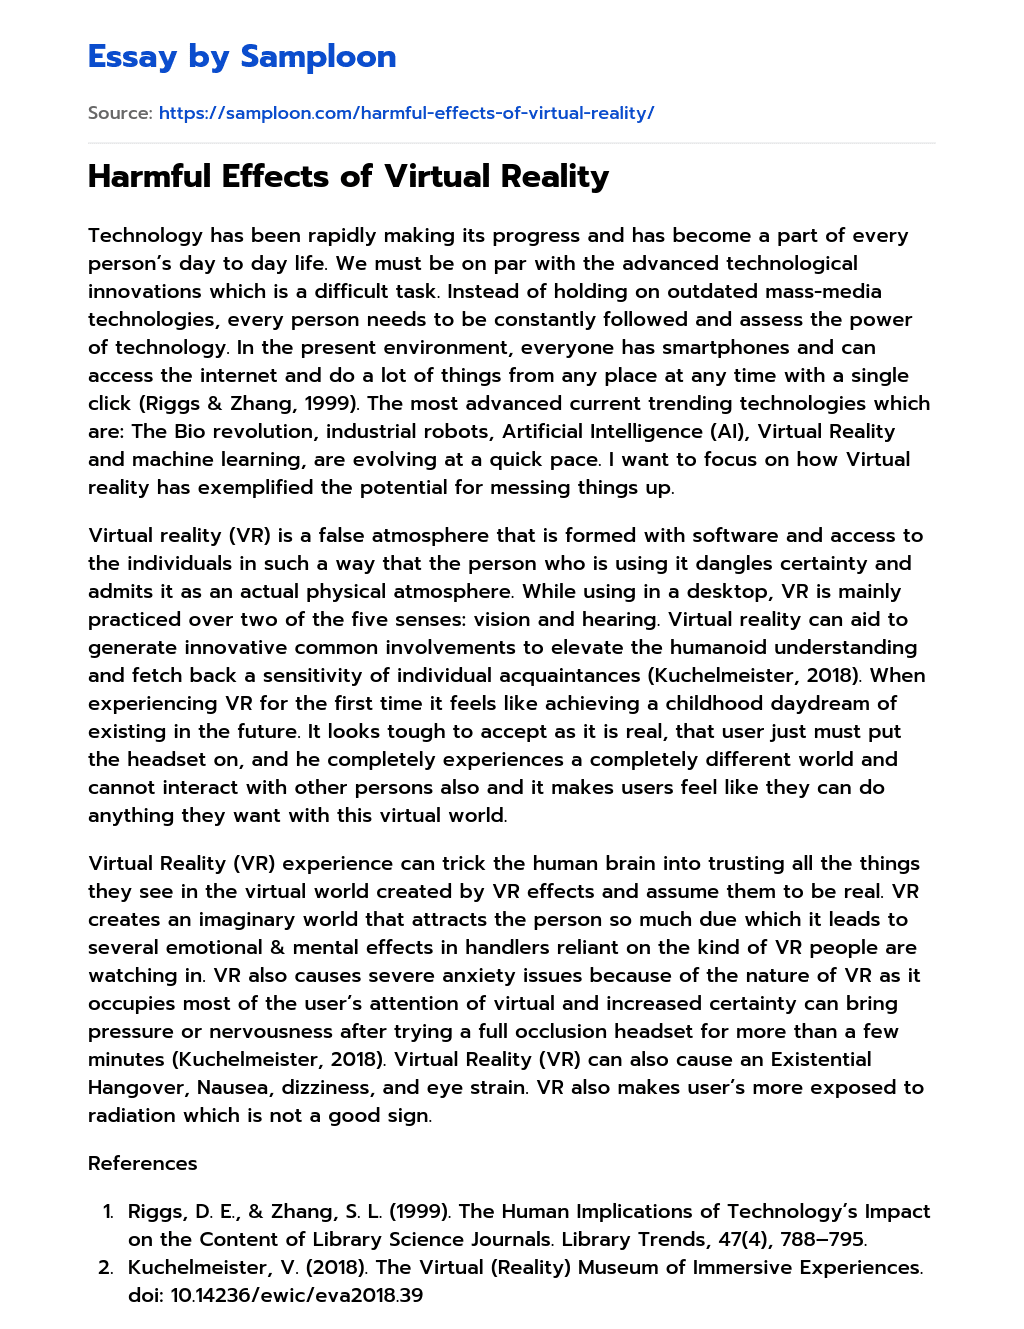 college essay about virtual reality